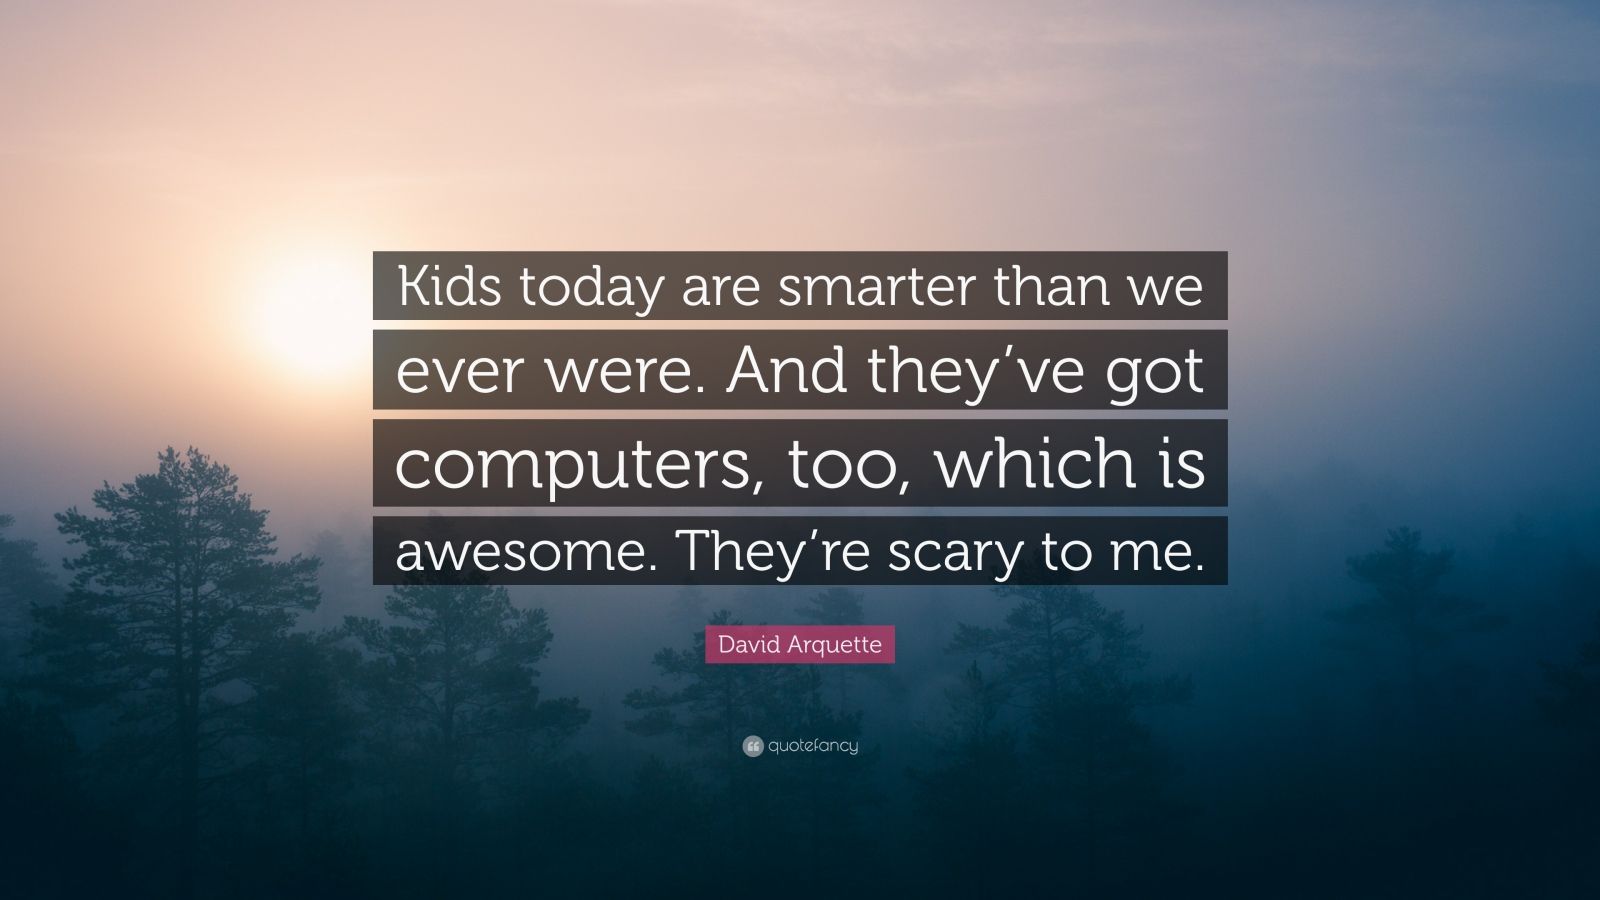 David Arquette Quote: “Kids today are smarter than we ever were. And